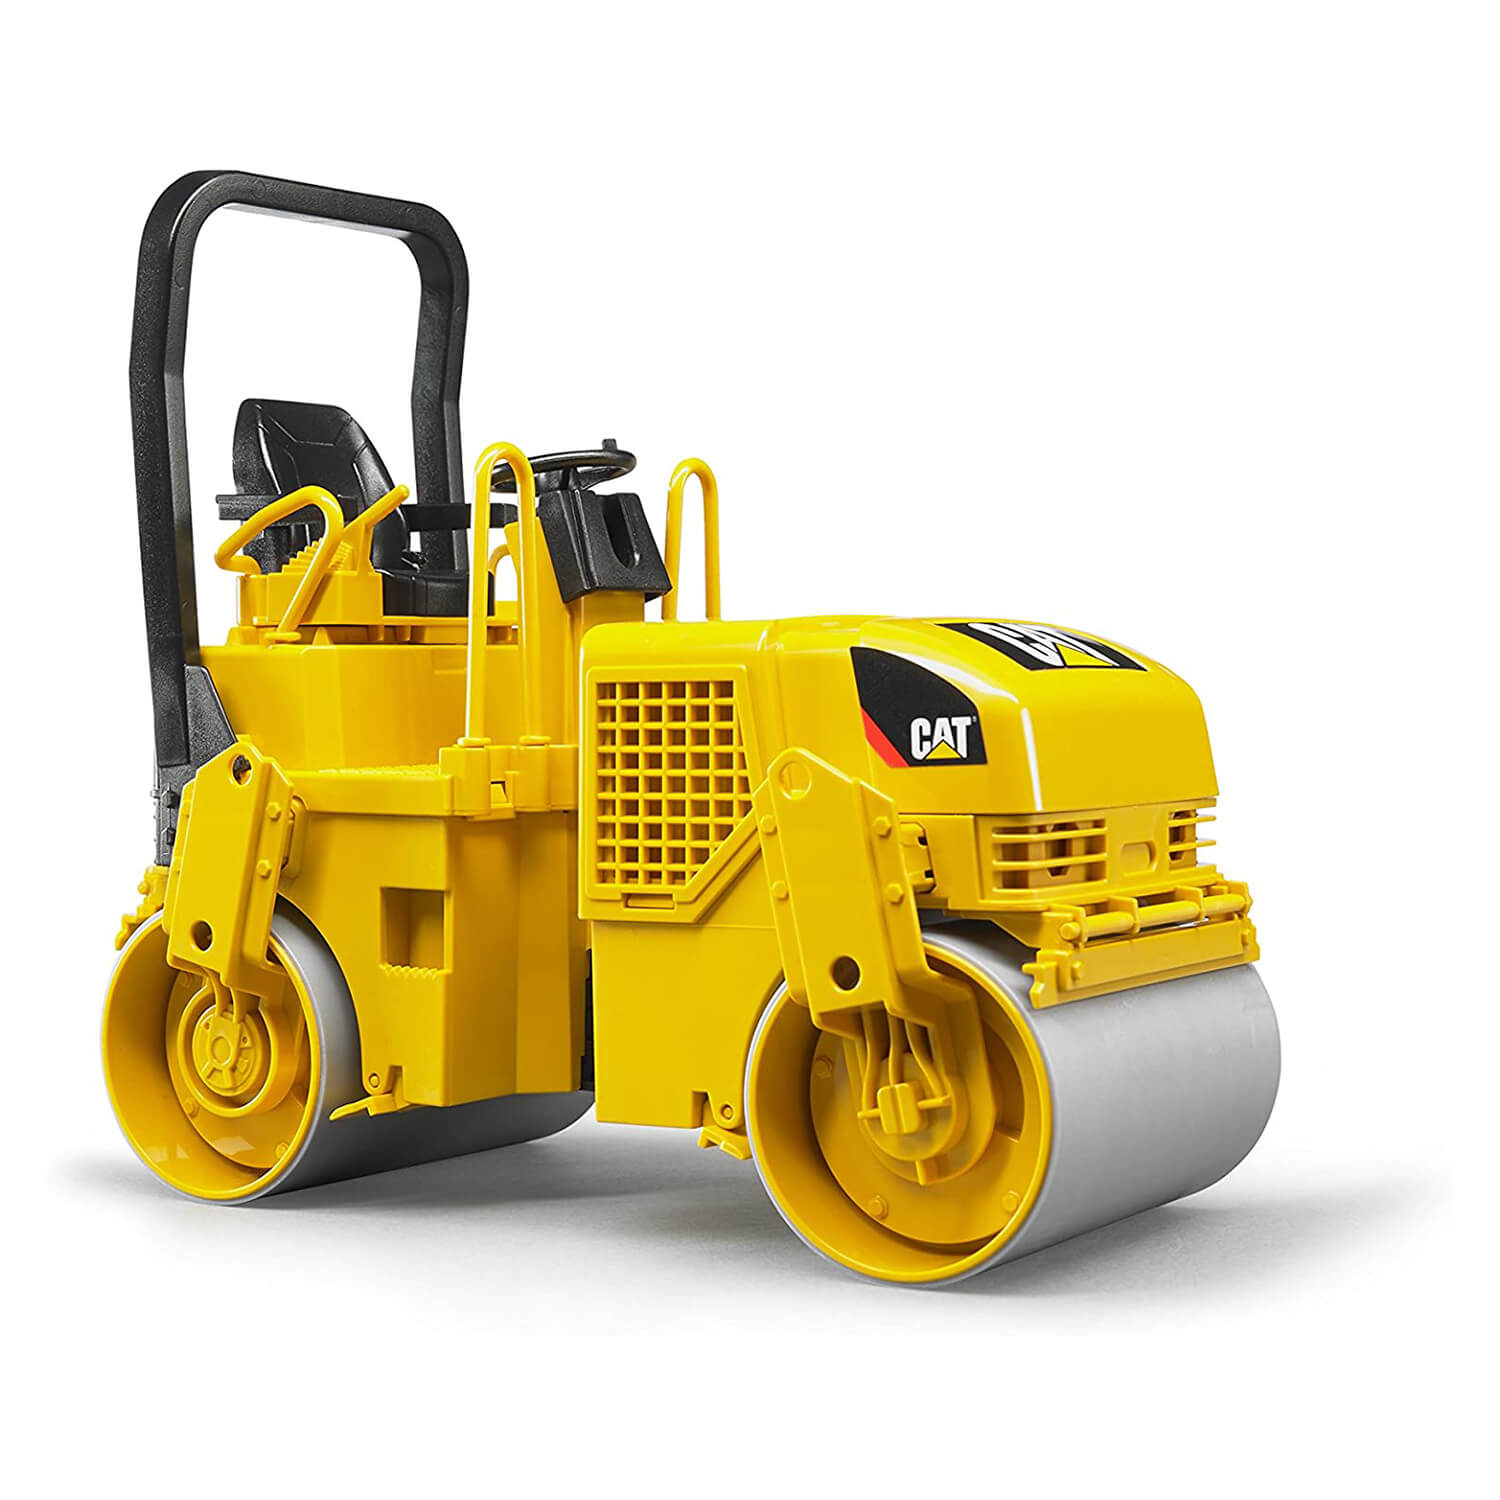 Side-front quarter angle of the Bruder Pro Series Caterpillar Asphalt Drum Compactor 1:16 Vehicle shown in yellow.